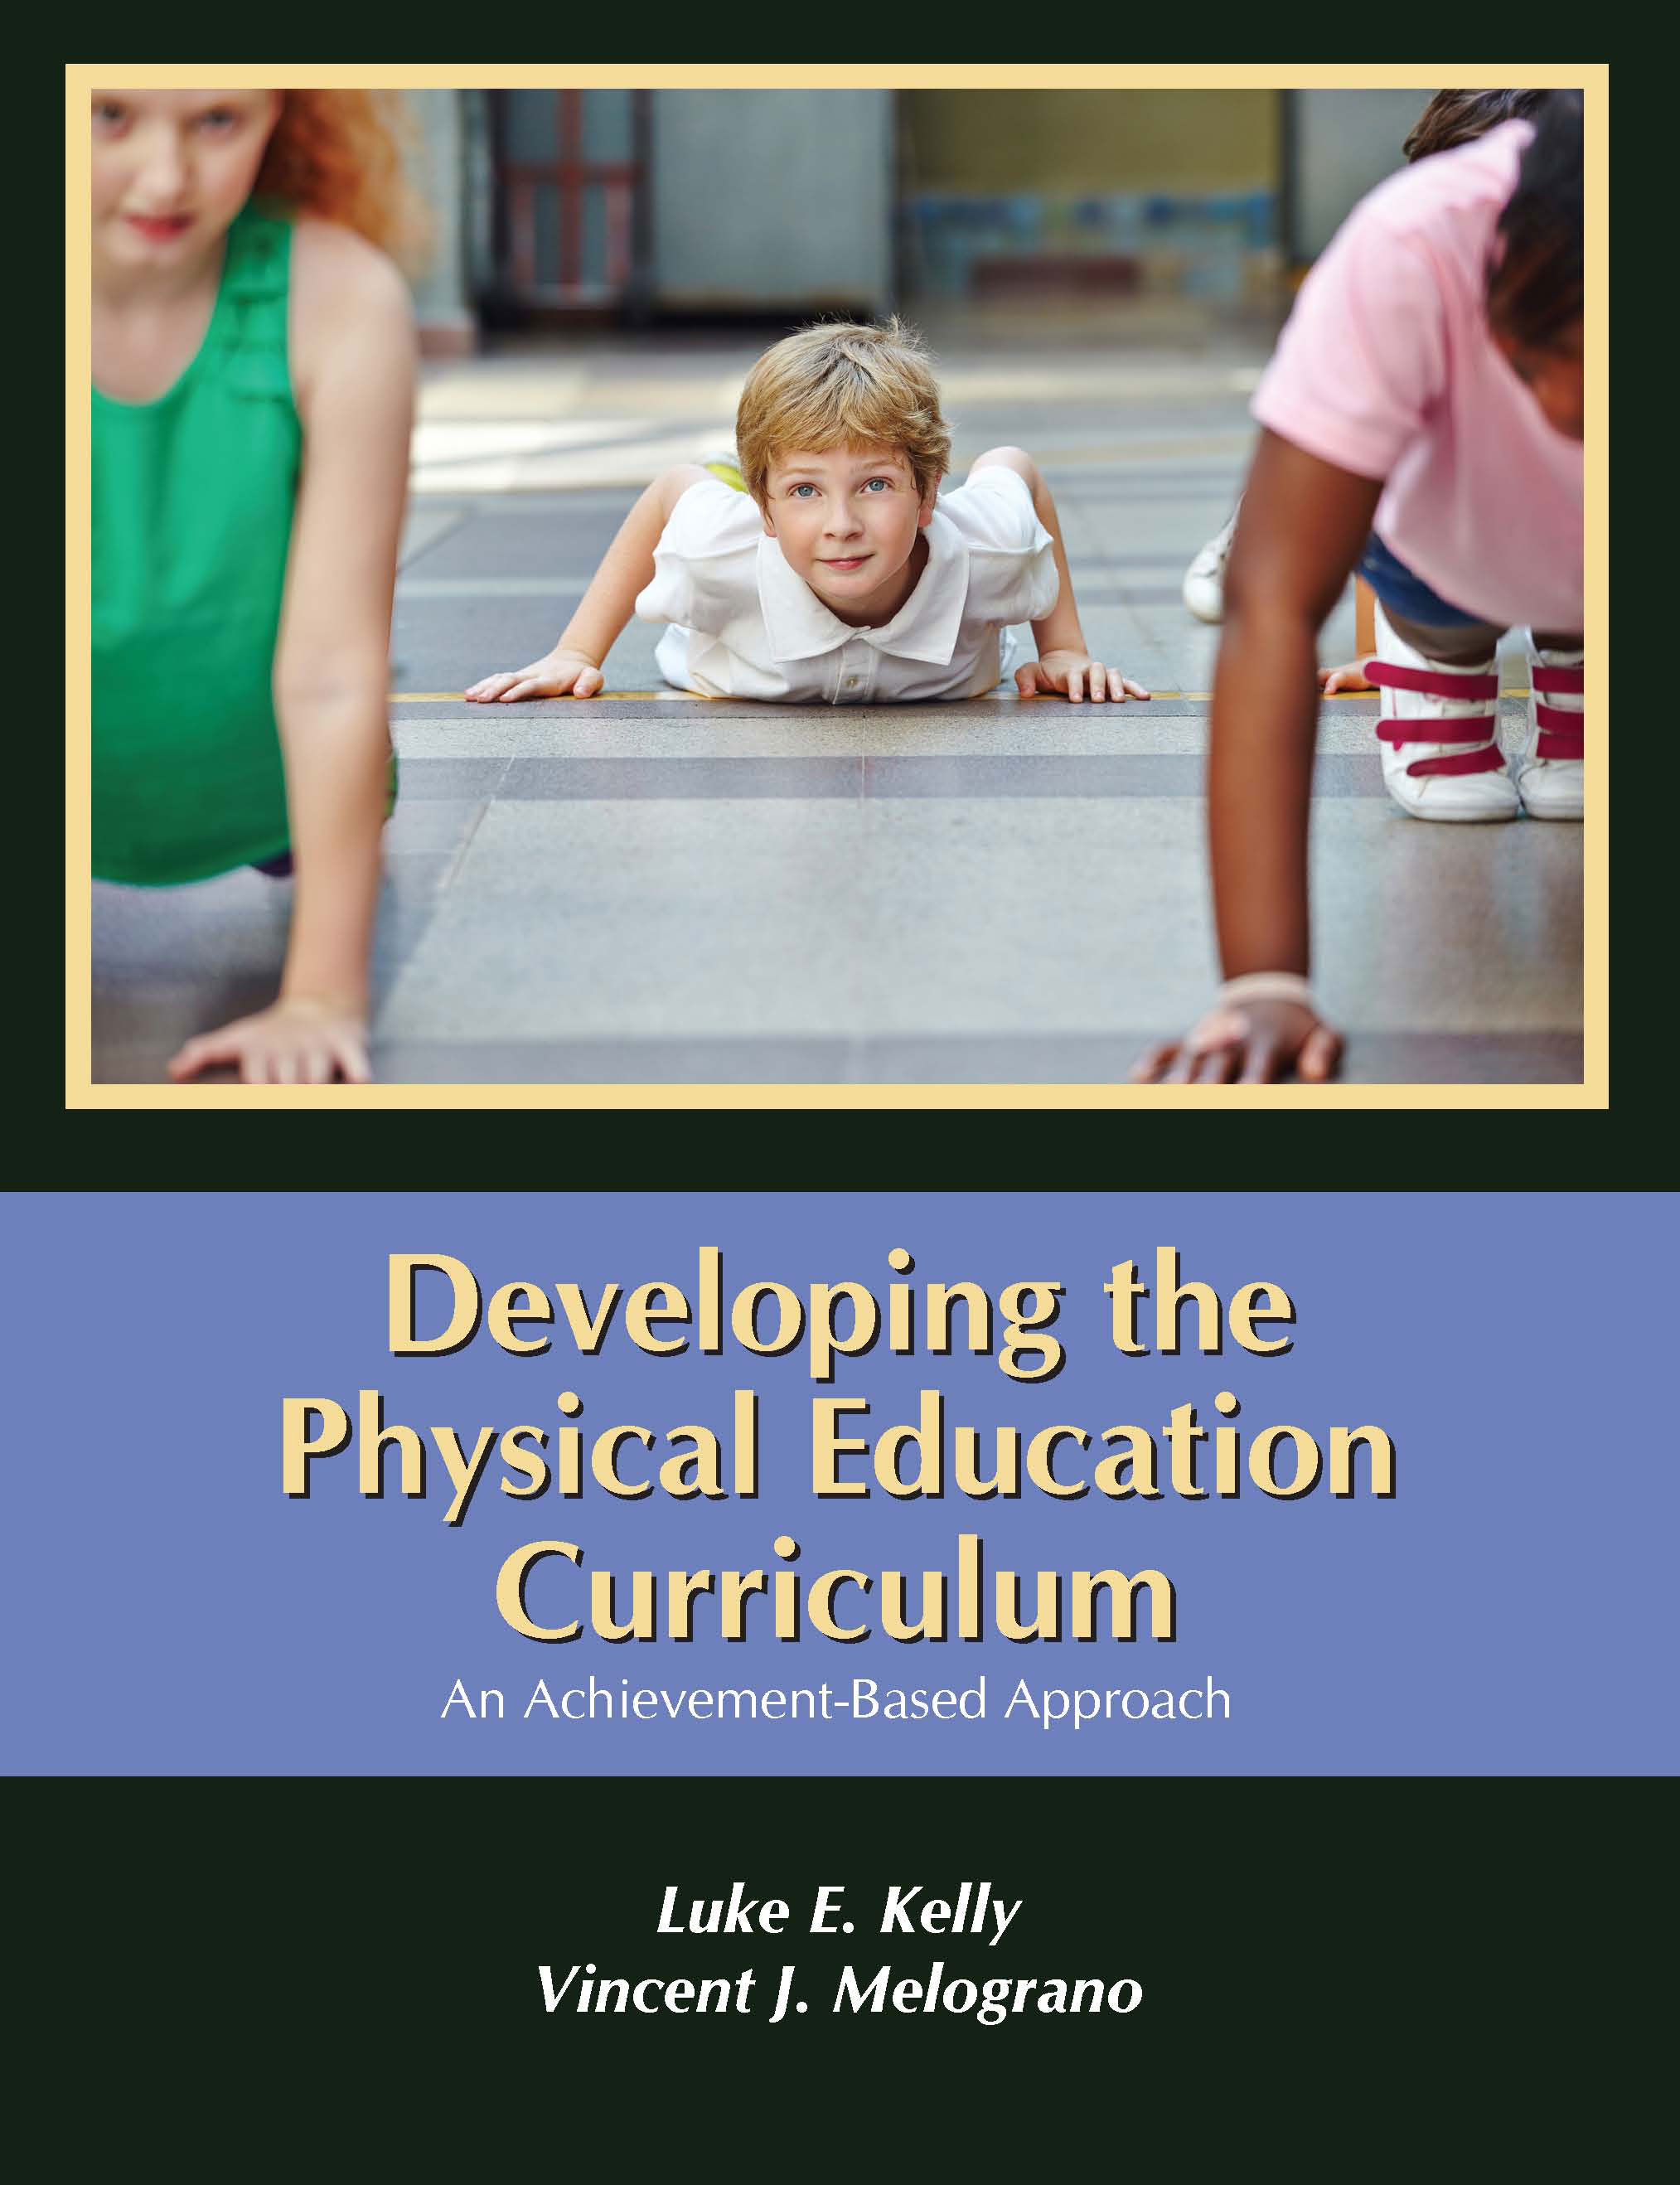 Developing the Physical Education Curriculum: An Achievement-Based Approach by Luke E. Kelly, Vincent J. Melograno